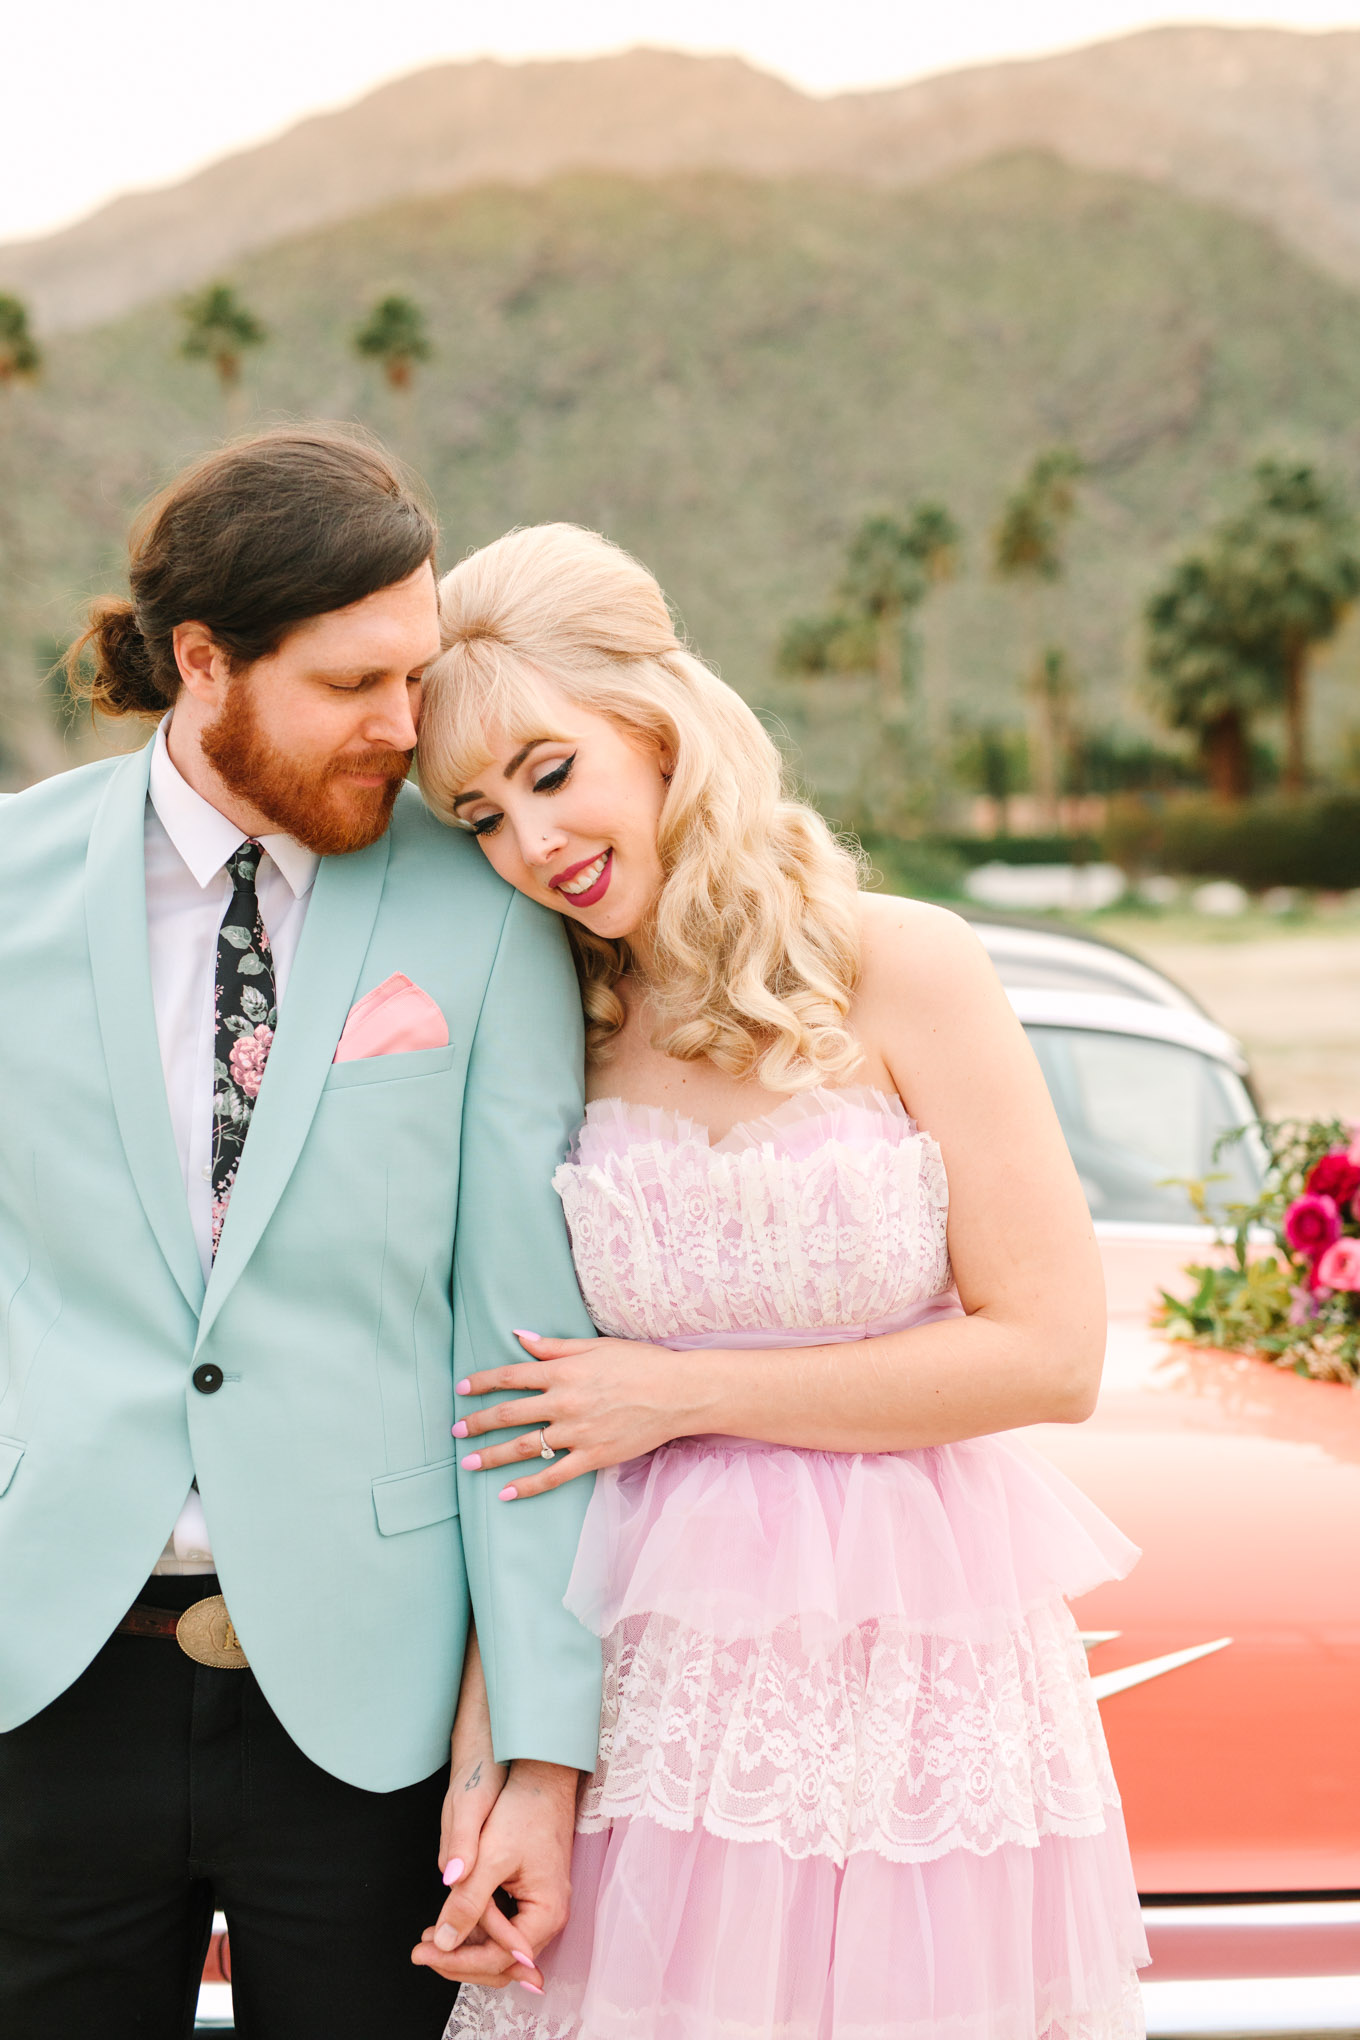 Retro couple embracing. Modern vintage-inspired Palm Springs engagement session with a 1960s pink Cadillac, retro clothing, and flowers by Shindig Chic. | Colorful and elevated wedding inspiration for fun-loving couples in Southern California | #engagementsession #PalmSpringsengagement #vintageweddingdress #floralcar #pinkcar   Source: Mary Costa Photography | Los Angeles